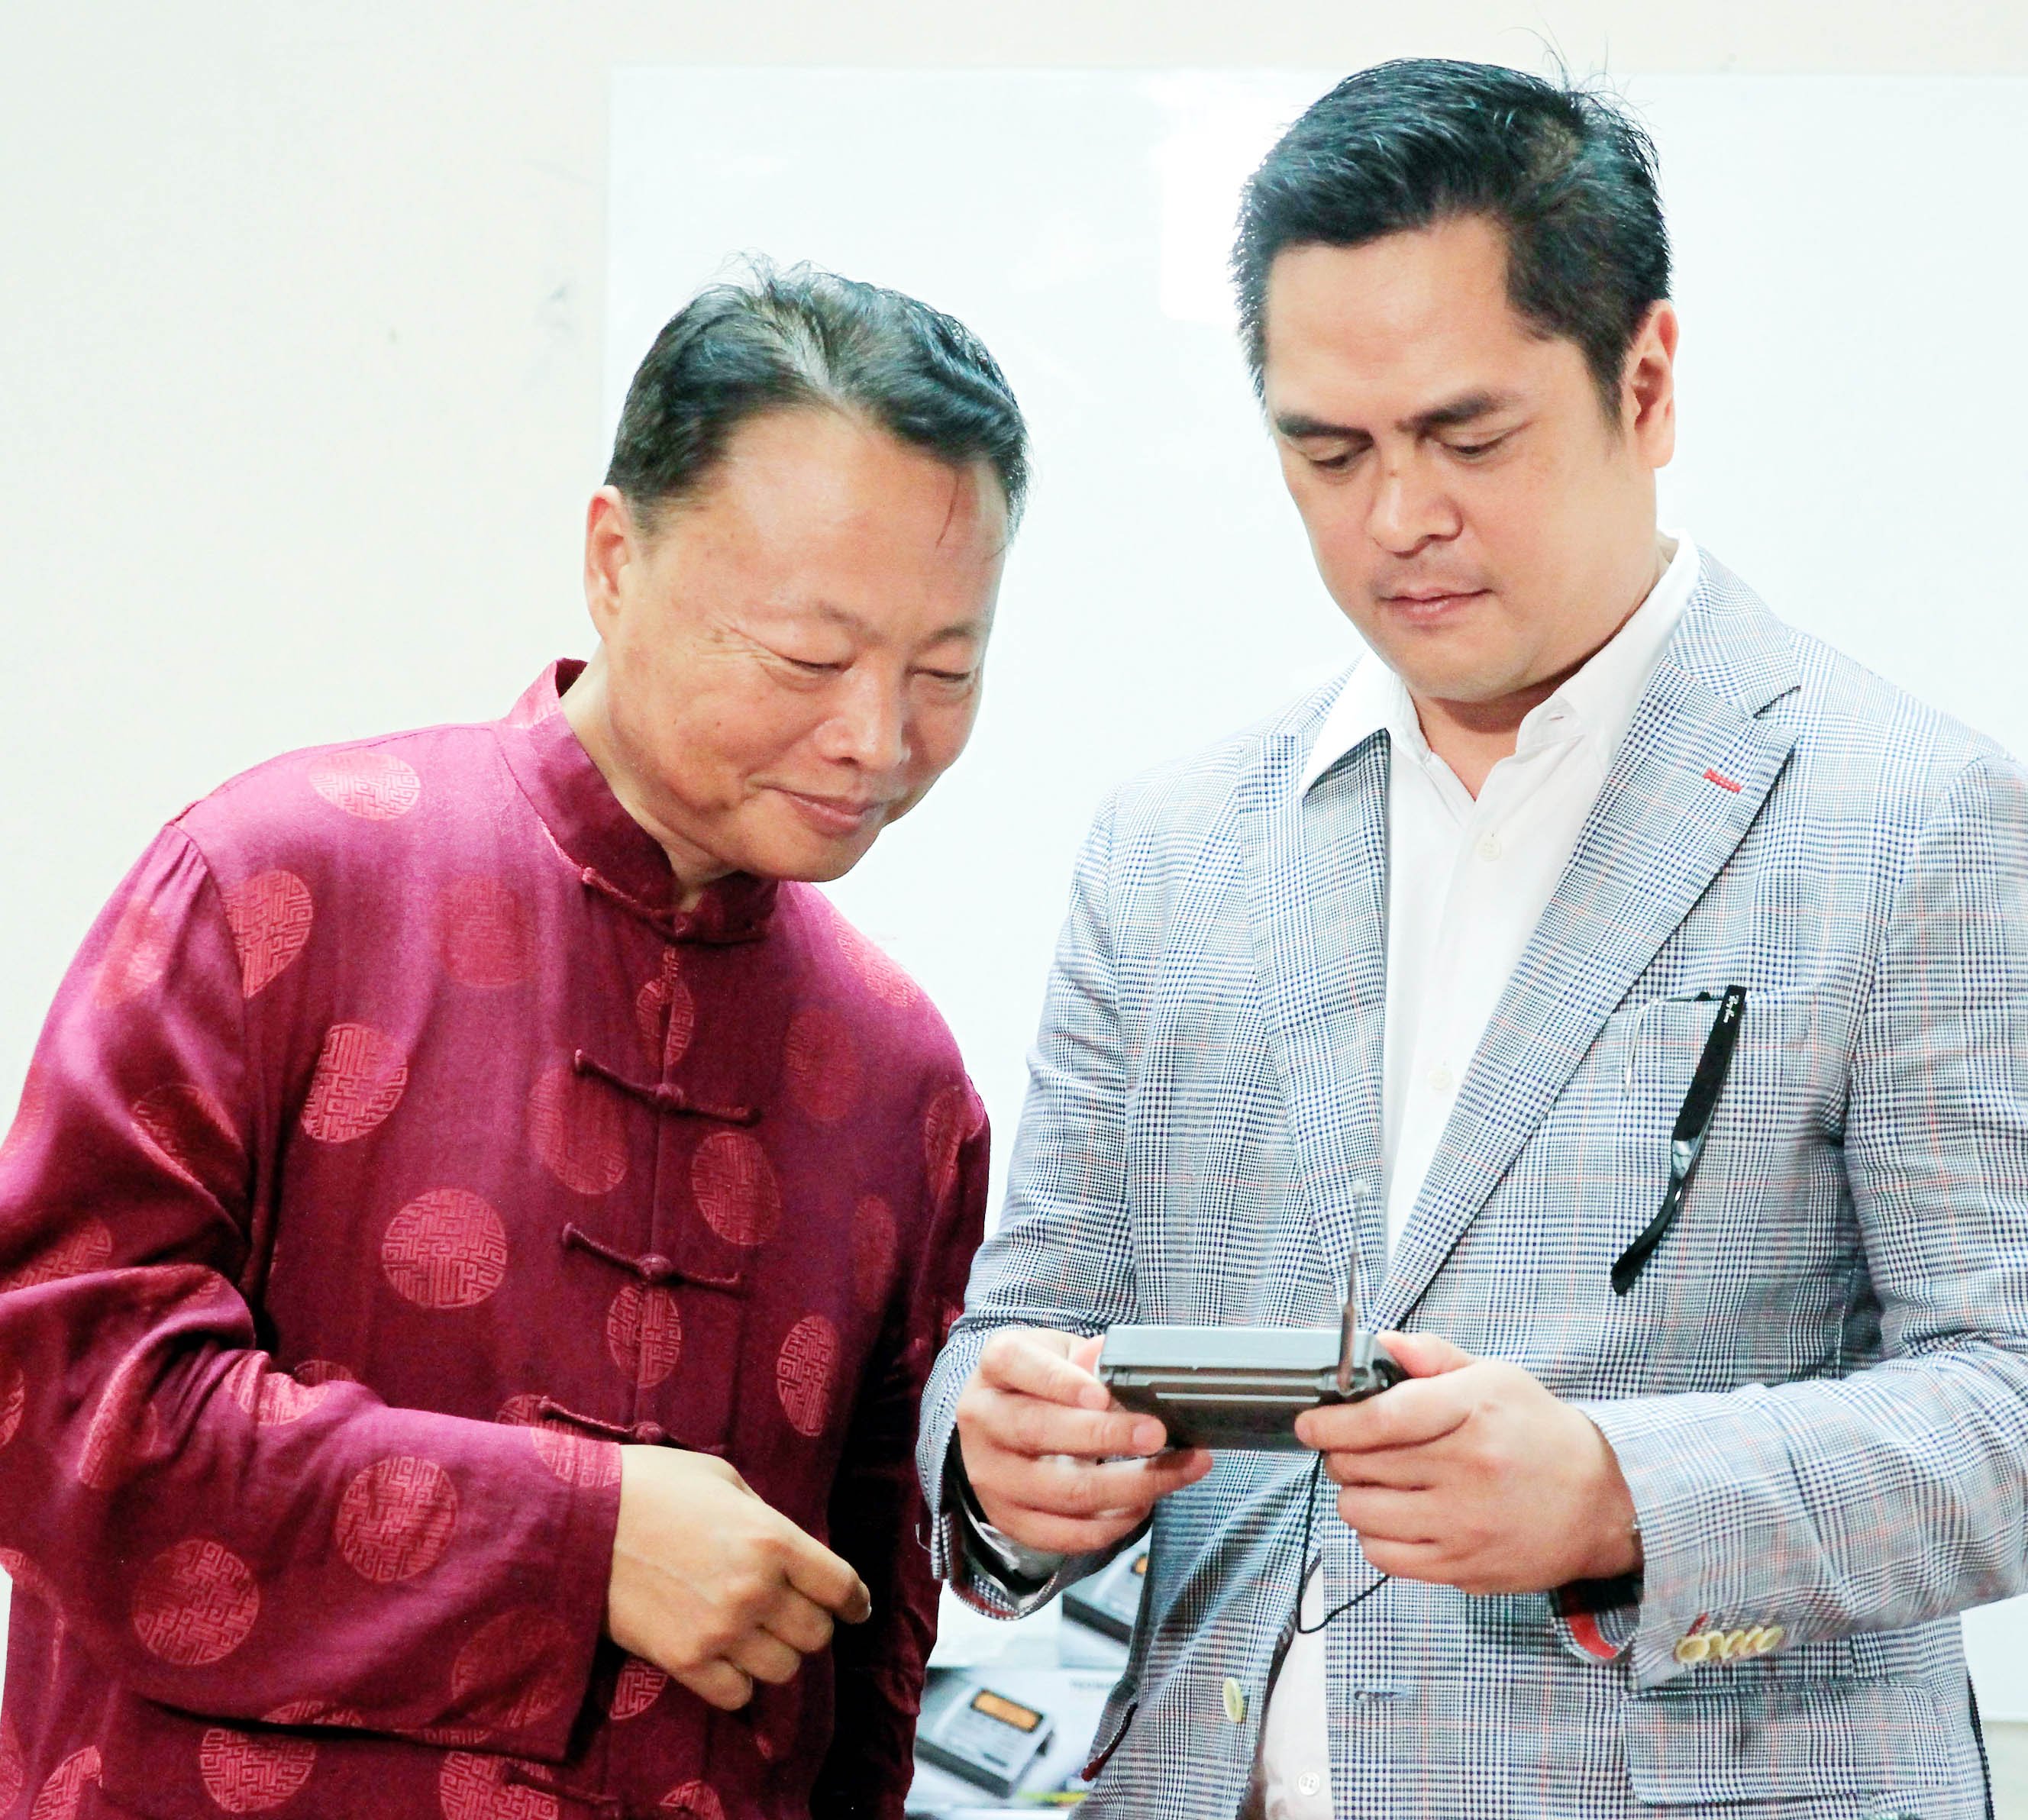 PCOO receives radios from Chinese gov't